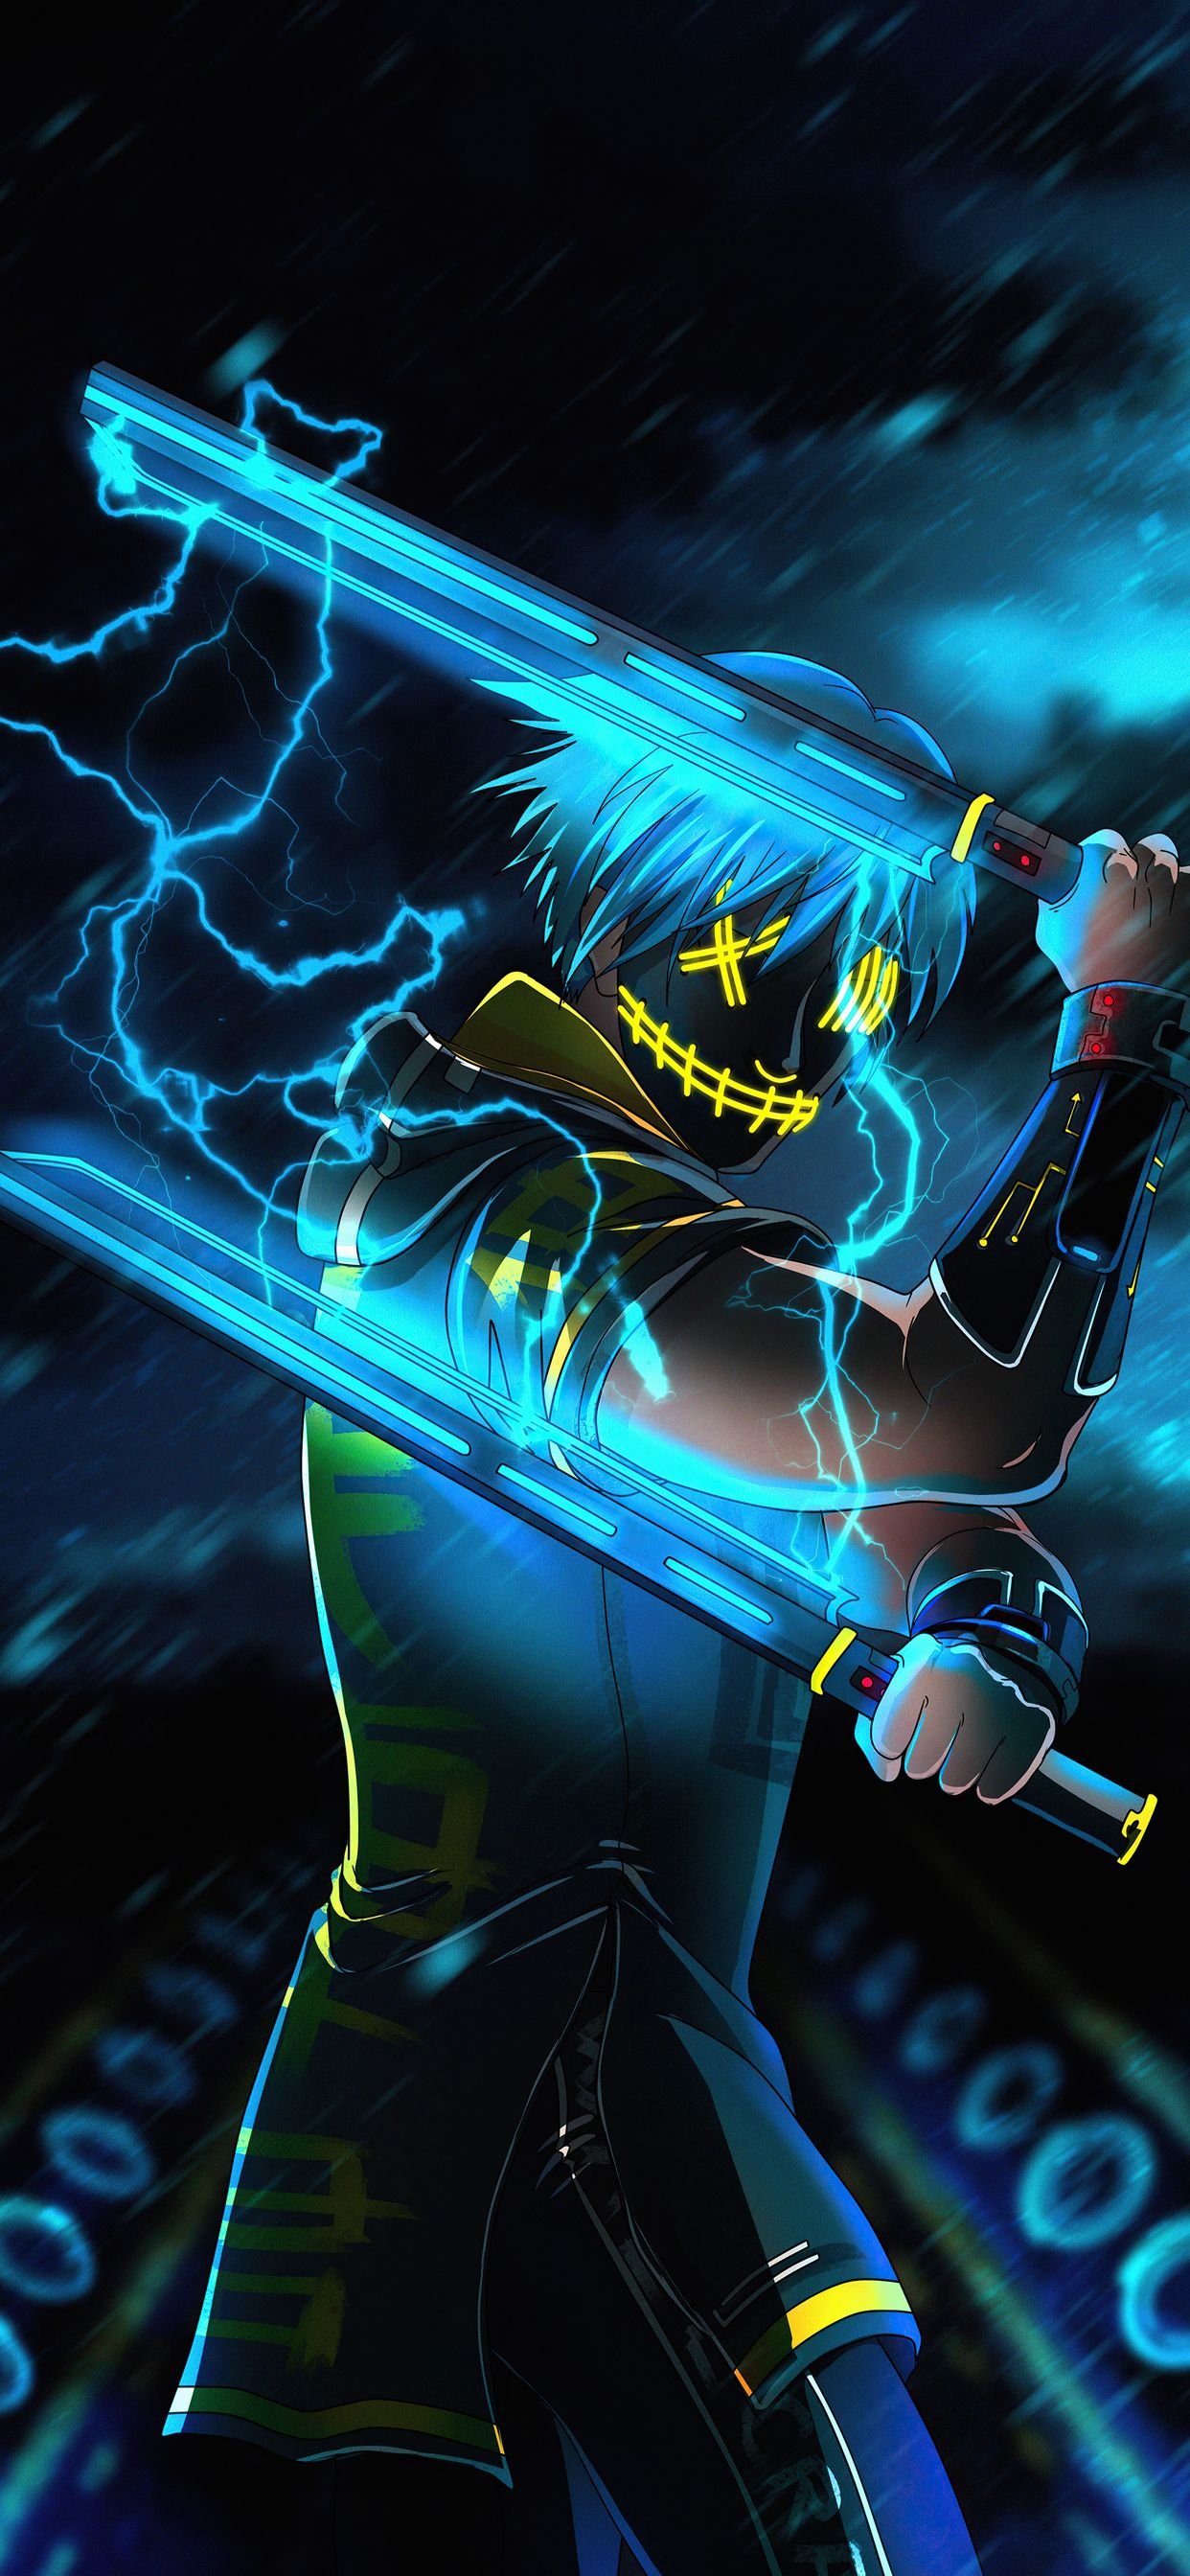 9,869 Cool Anime Images, Stock Photos & Vectors | Shutterstock